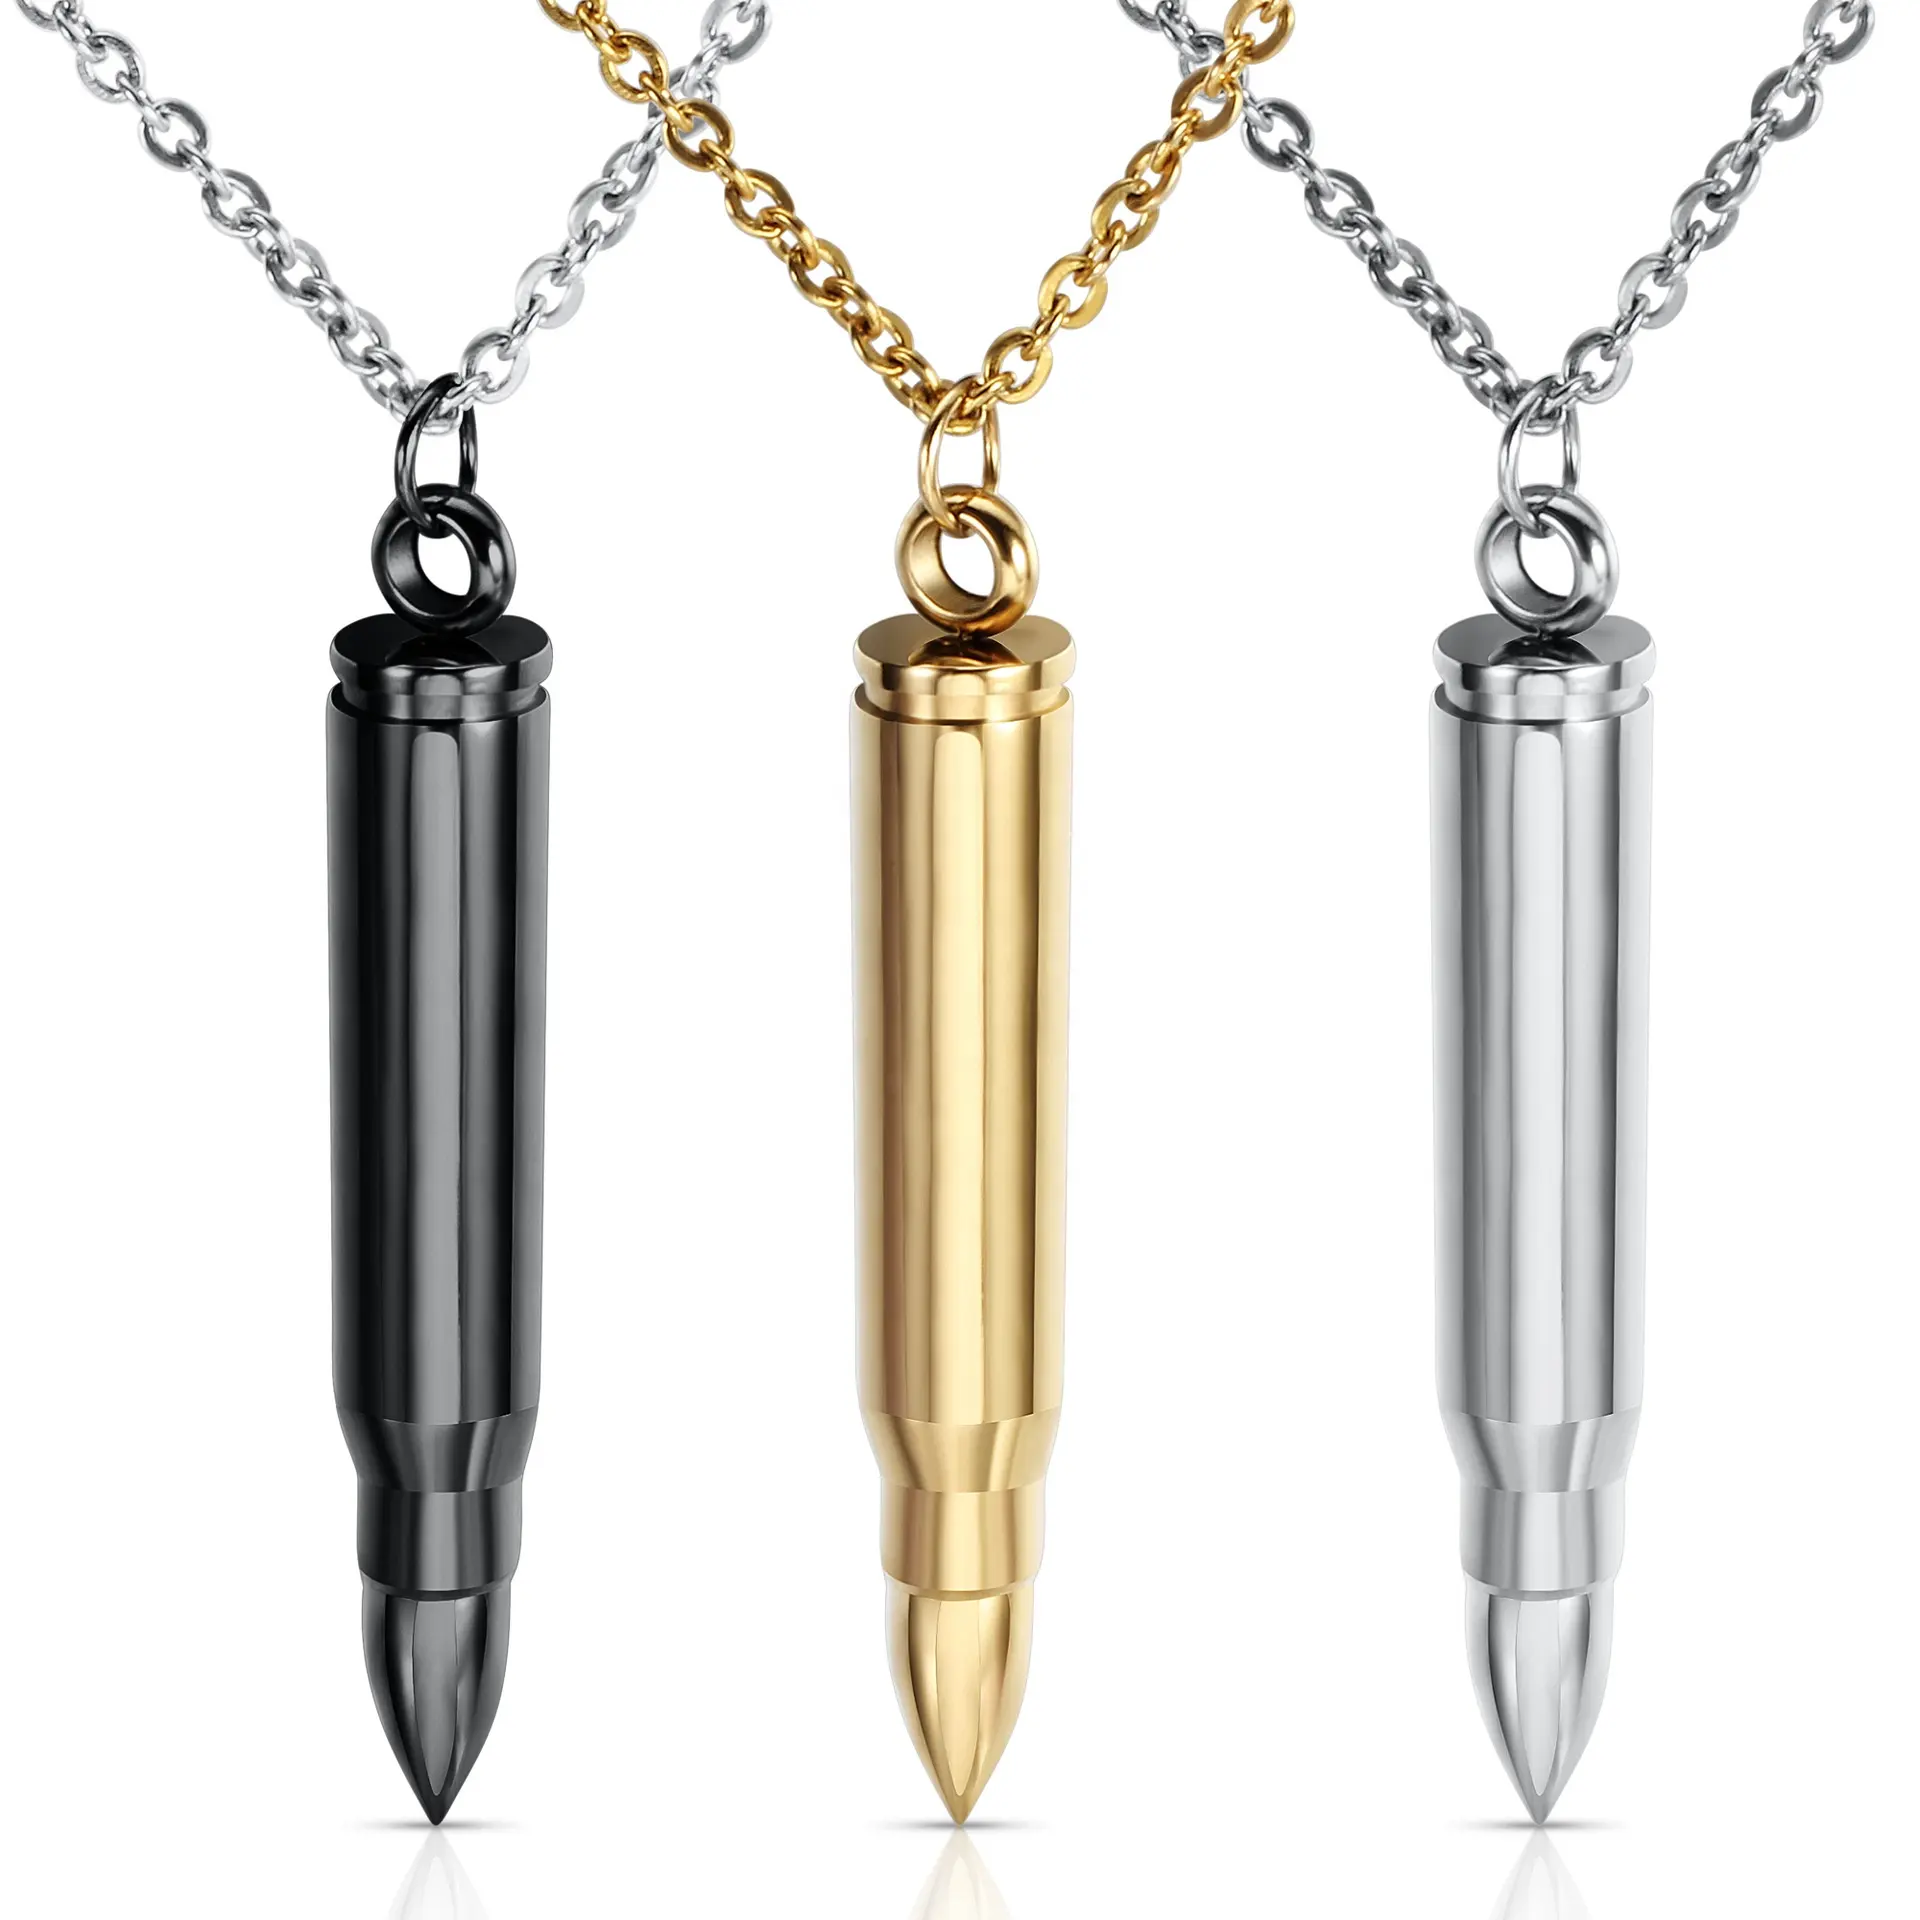 Fashion Street Hip Hop Design Silver Gold Plated Engraved Man Necklace Stainless Steel Bullet Pendant Necklace For Male Jewelry